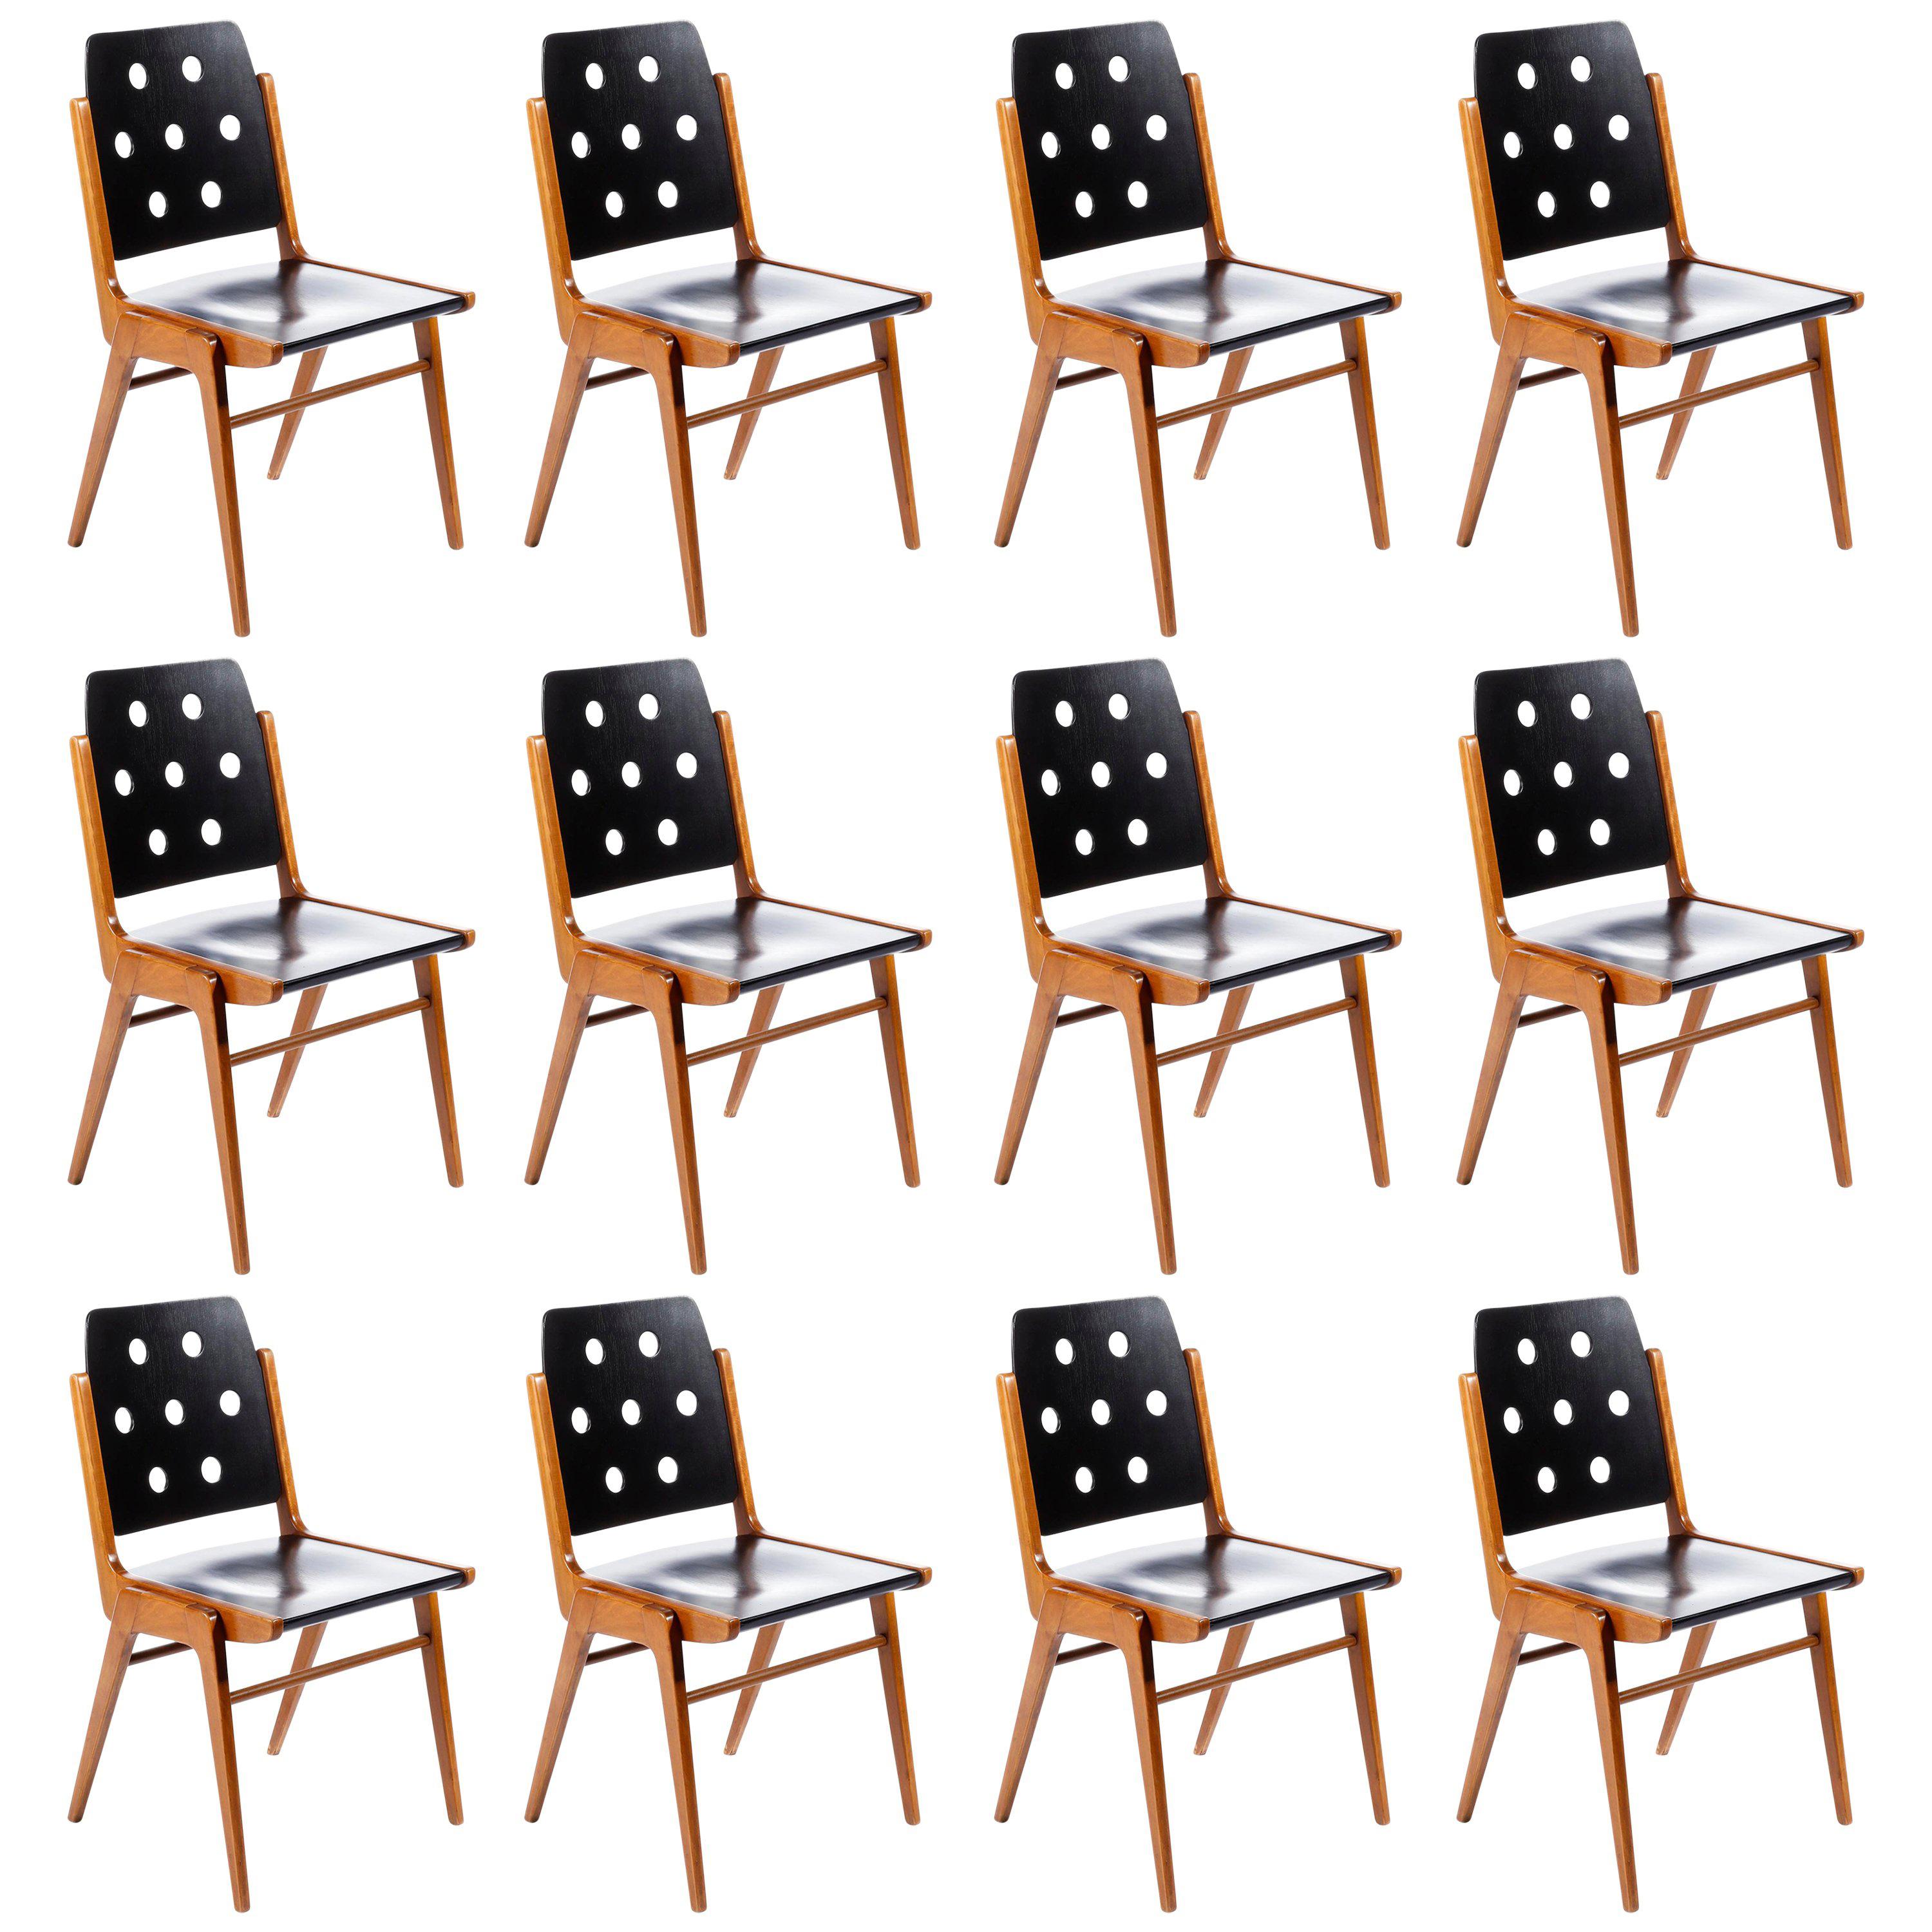 One of 12 Stacking Chairs Franz Schuster, Bicolored Beech Black, Austria, 1959